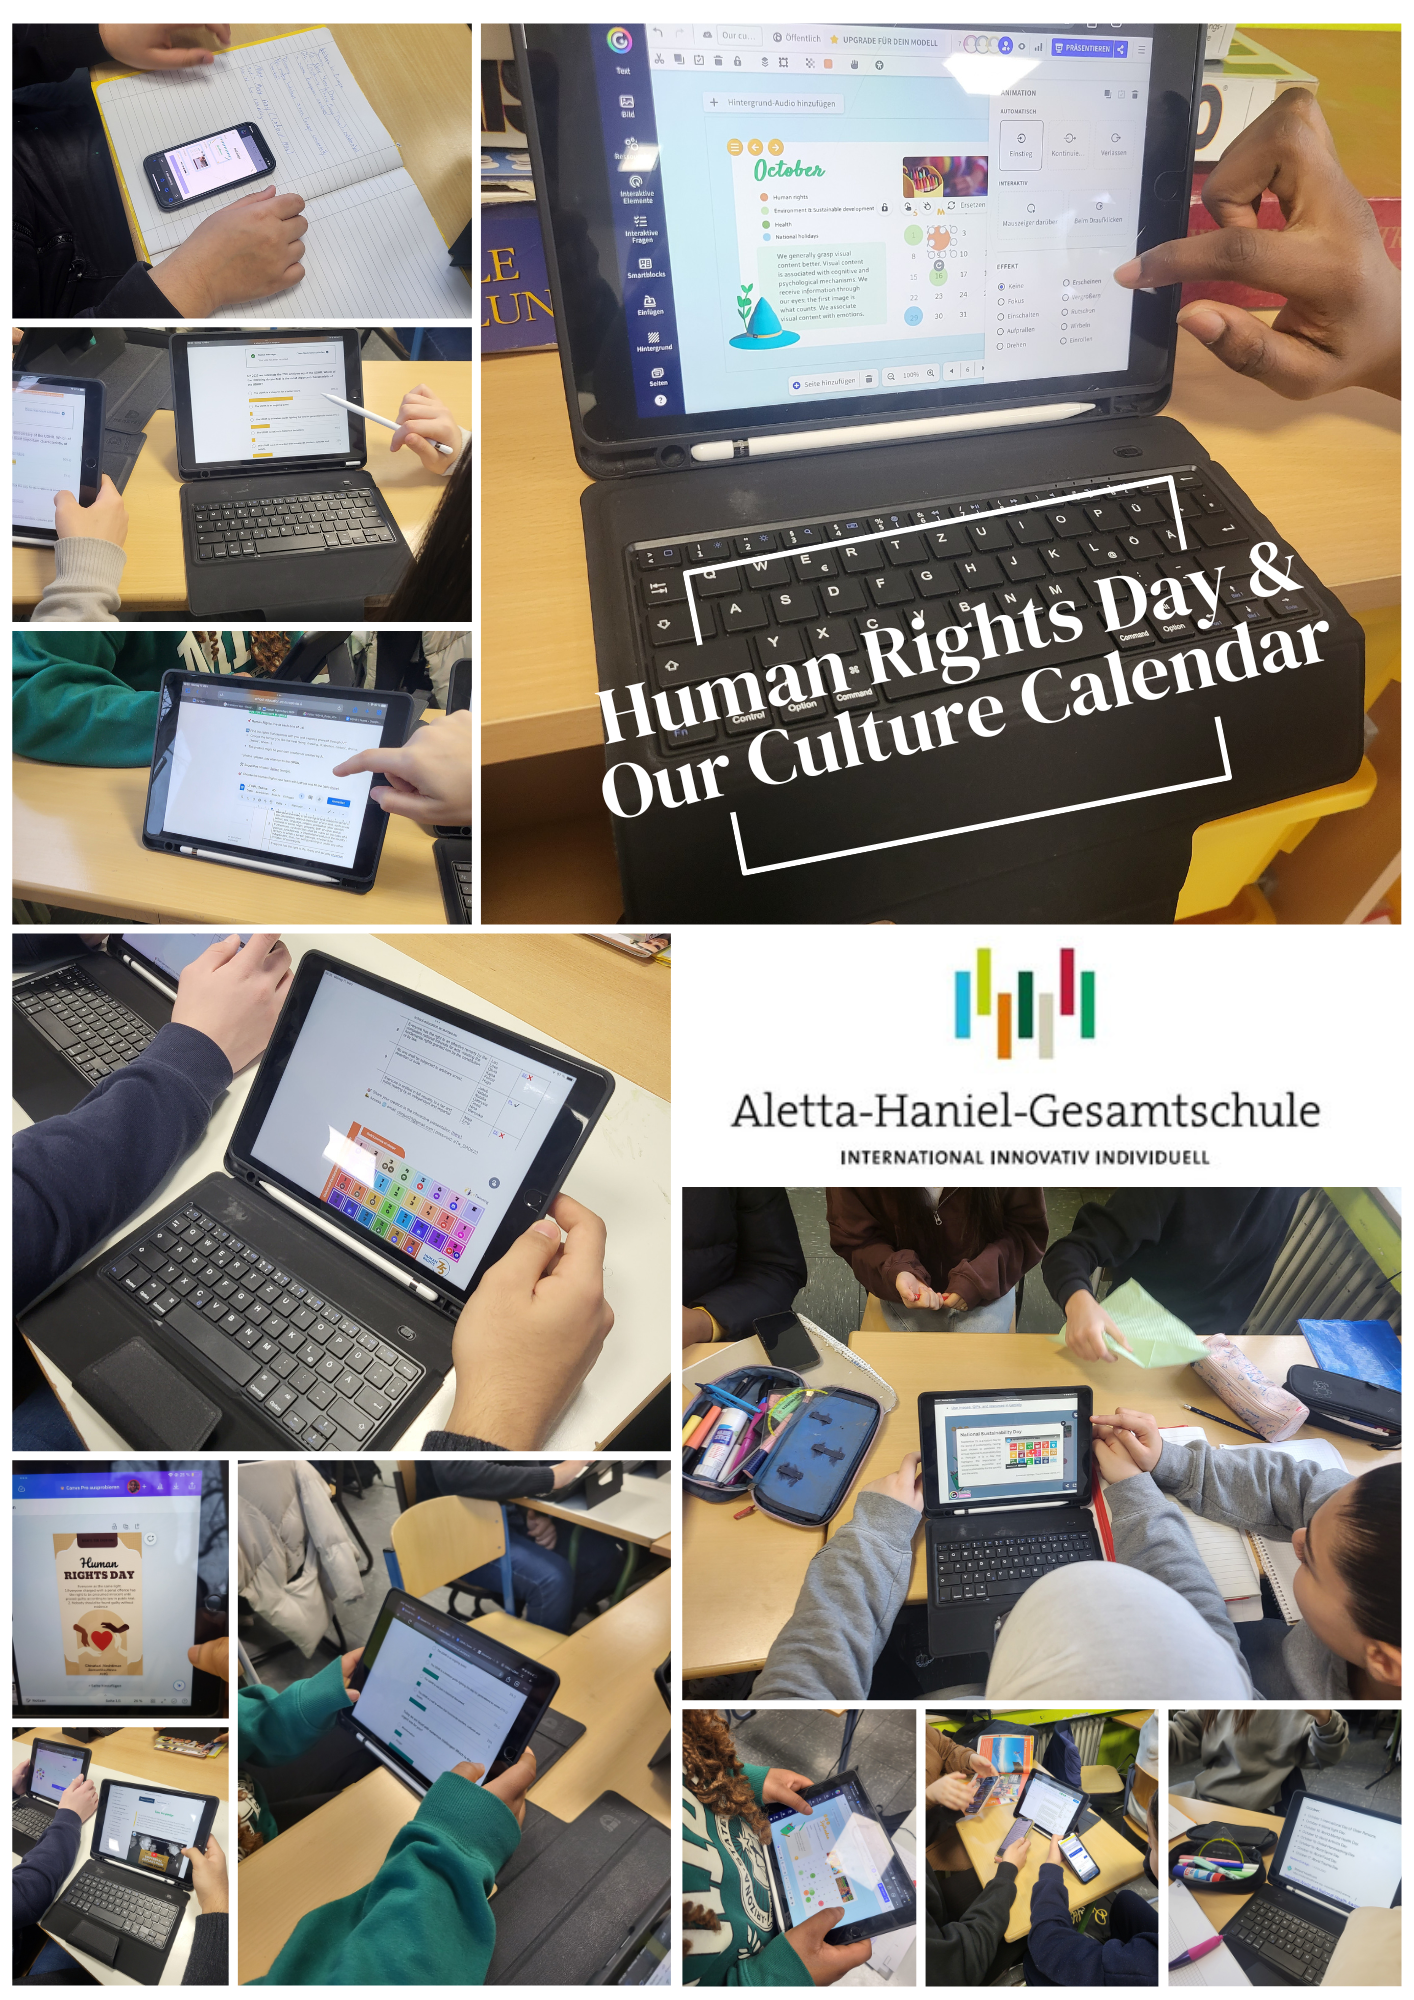 Human Rights Day and Our Culture Calendar